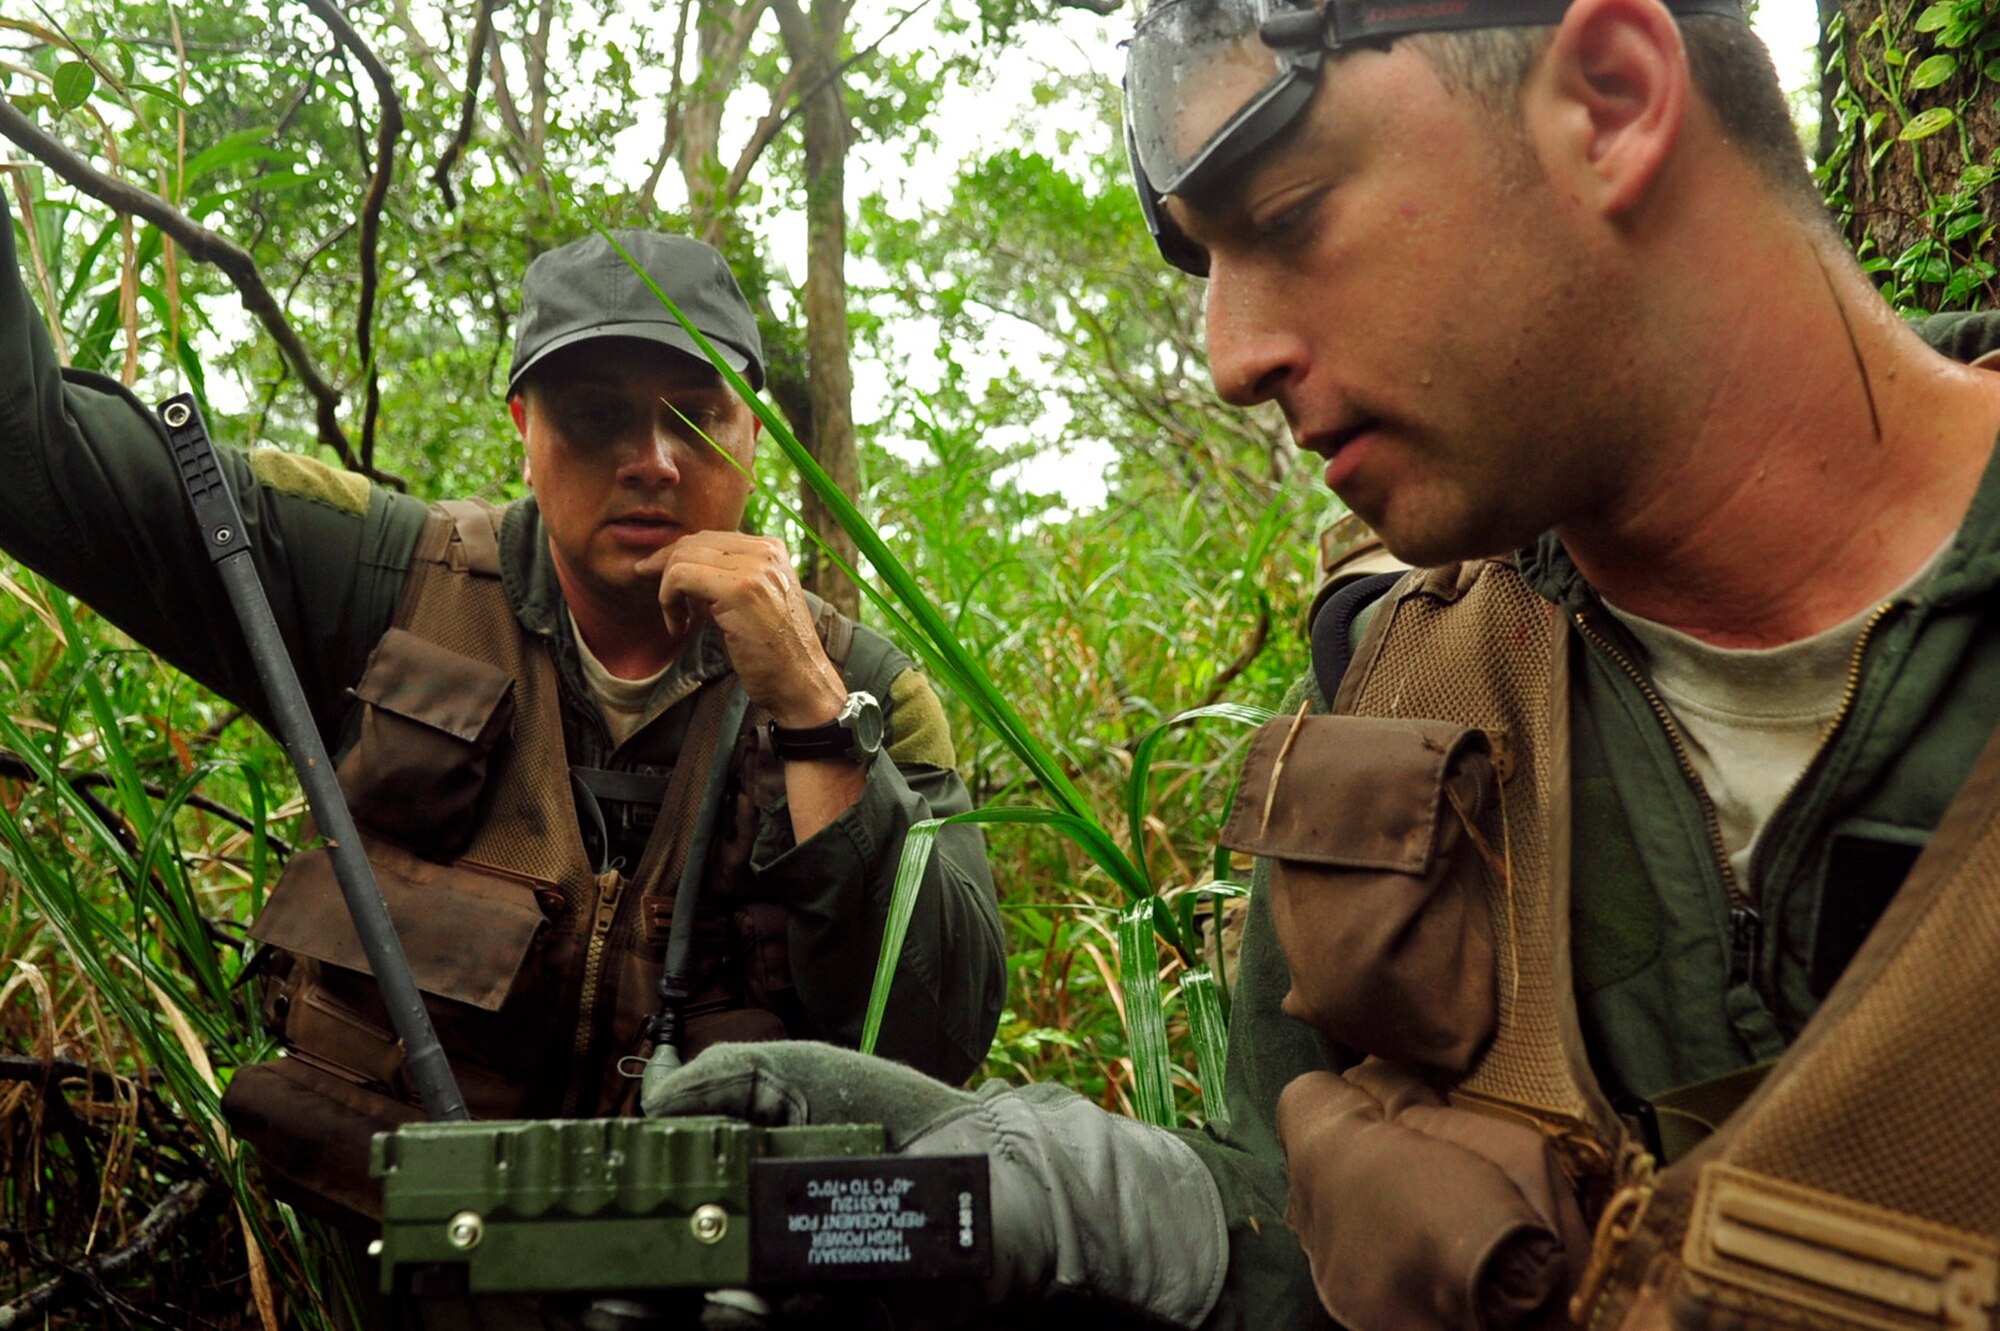 Master Sgt. John Matye (left) and Airman 1st Class Michael Mendes (right), both members of the 17th Special Operations Squadron, find the coordinates on a global positioning system to pinpoint the correct direction to travel during an exercise at Kadena Air Base’s Area 1 July 1. Every three years aircrew members must undergo a refresher course of Survival, Evasion, Resistance and Escape training. (U.S. Air Force photo by Senior Airman Amanda Grabiec)